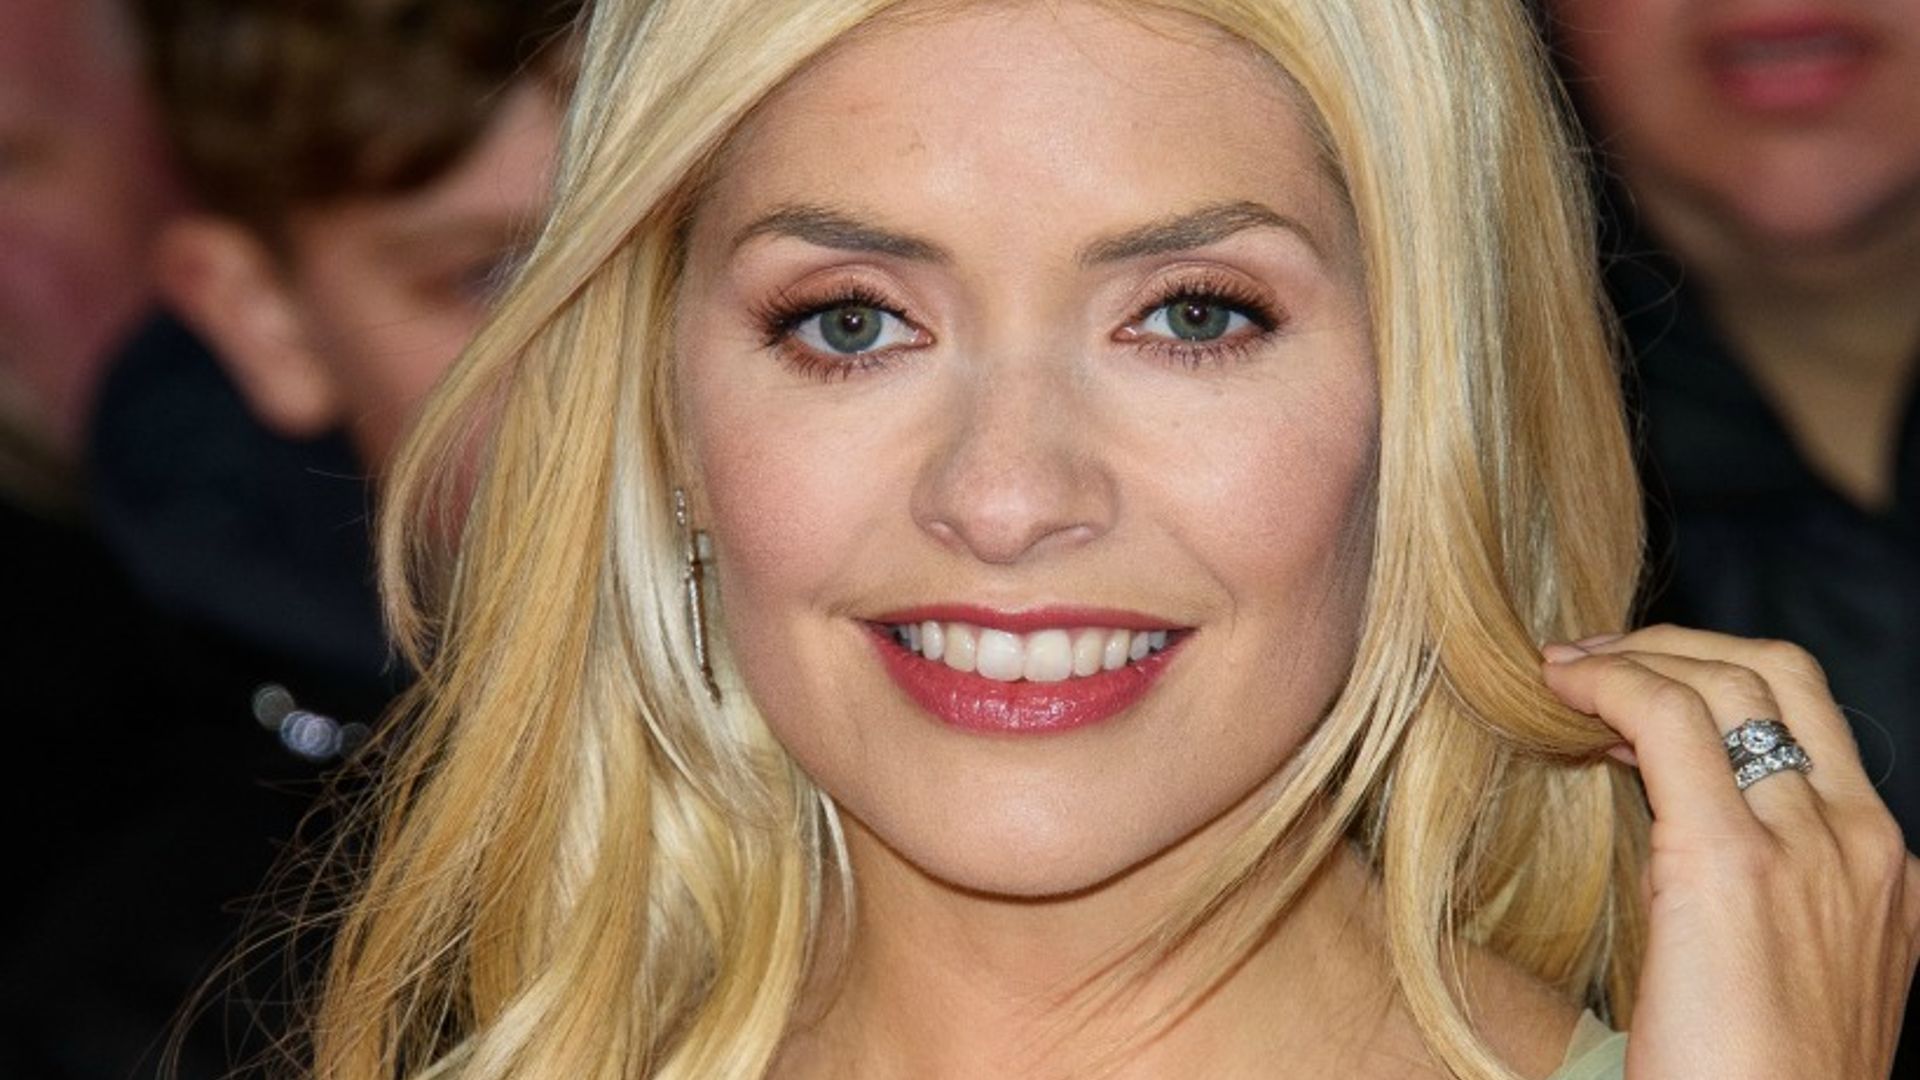 Holly Willoughbys Makeup Artist Reveals She Uses £10 Burts Bees Lip Balm Hello 